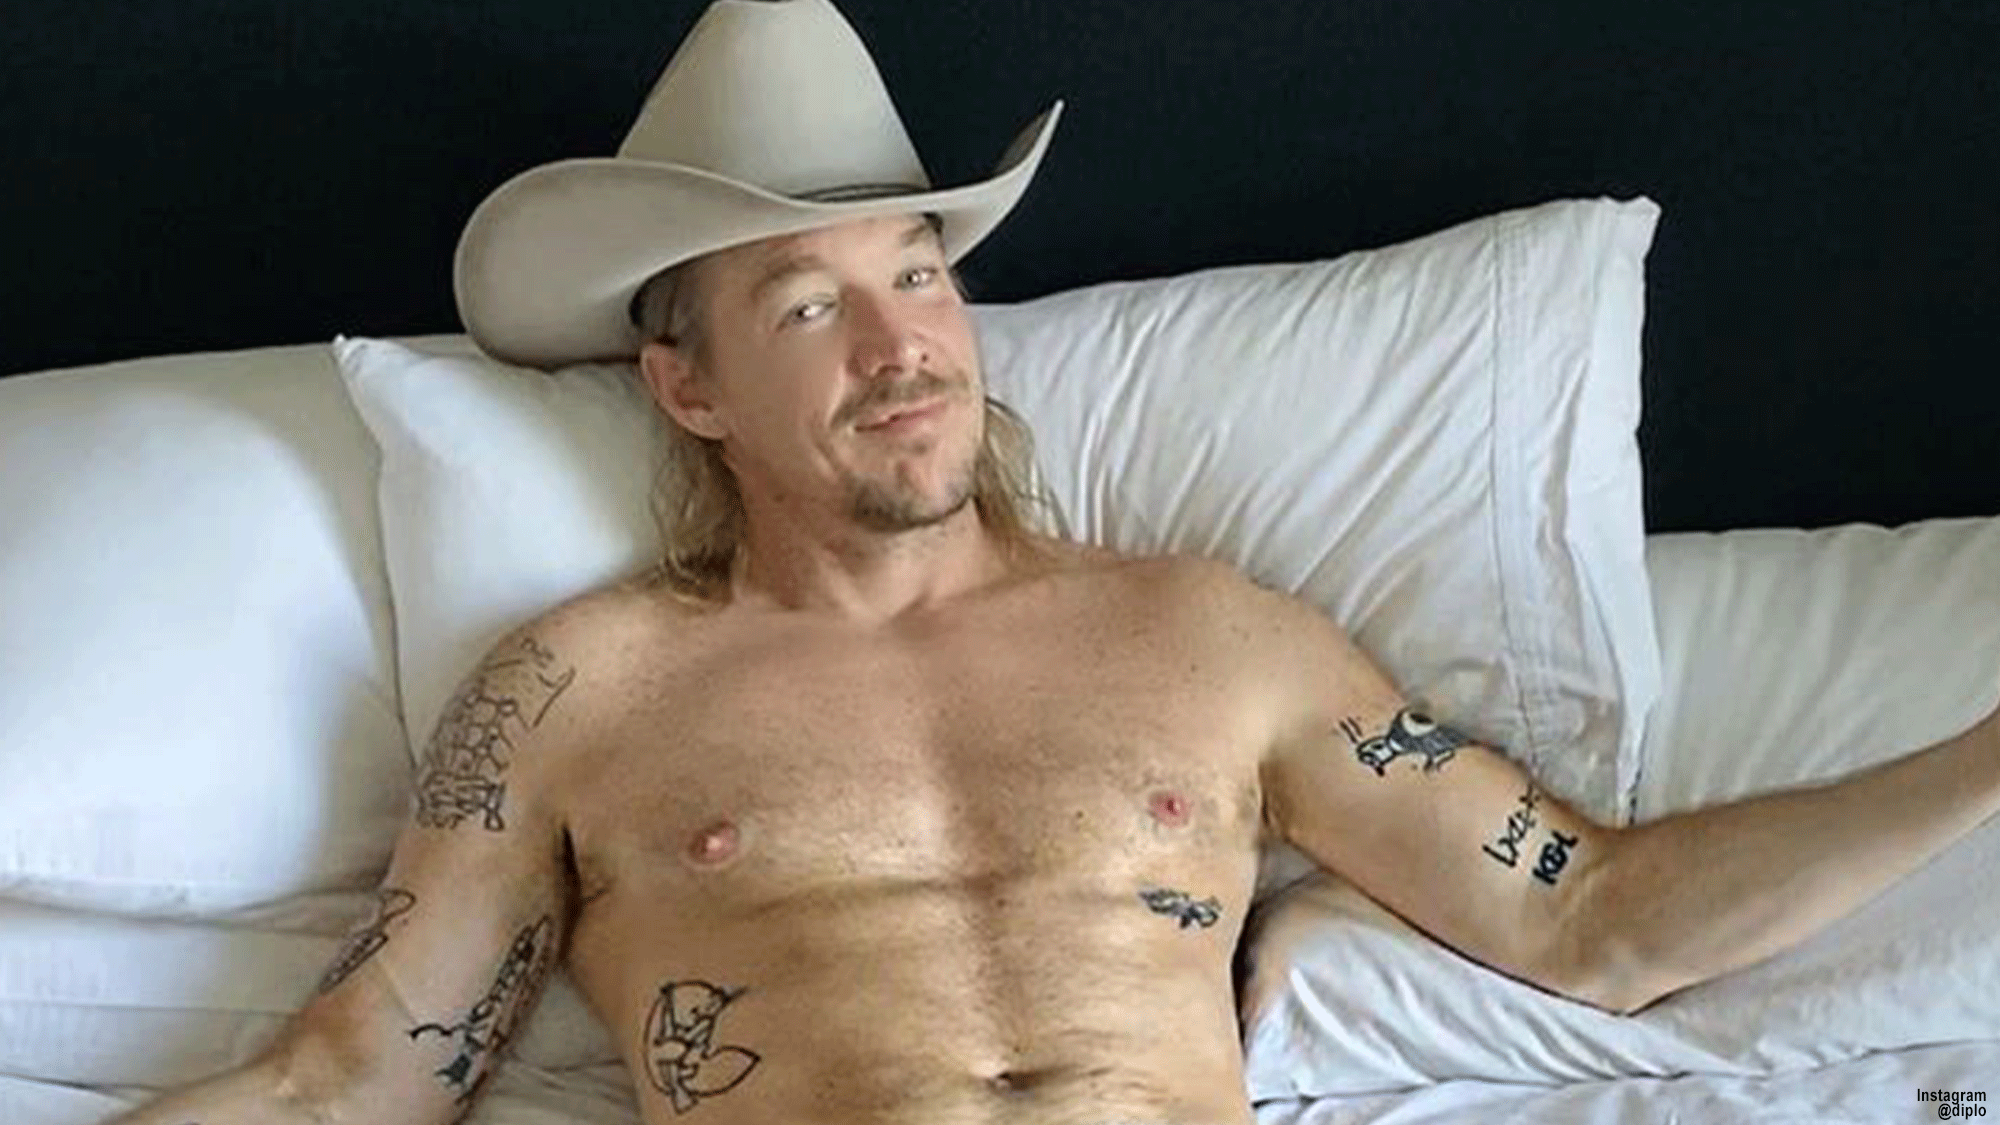 Diplo Posts A Nude To Remind Everyone To Vote - TheSword.com.